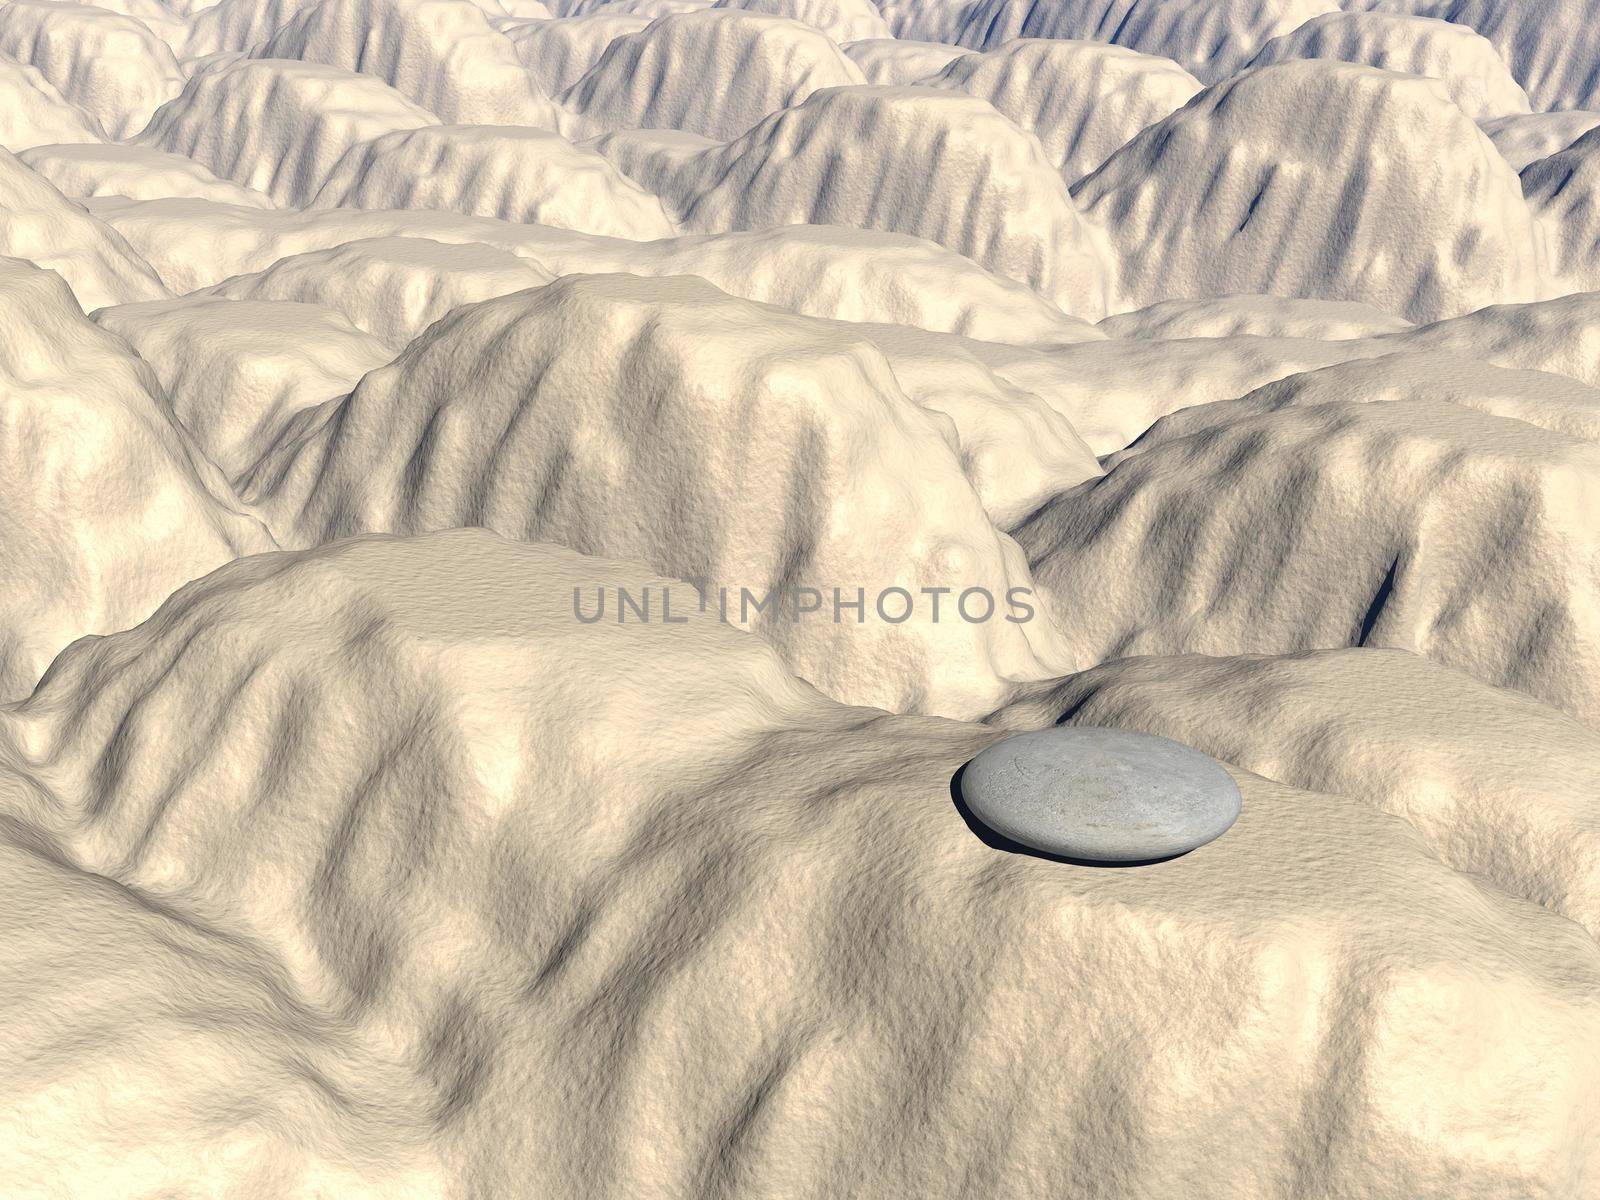 One single white stone in the middle of sand dunes